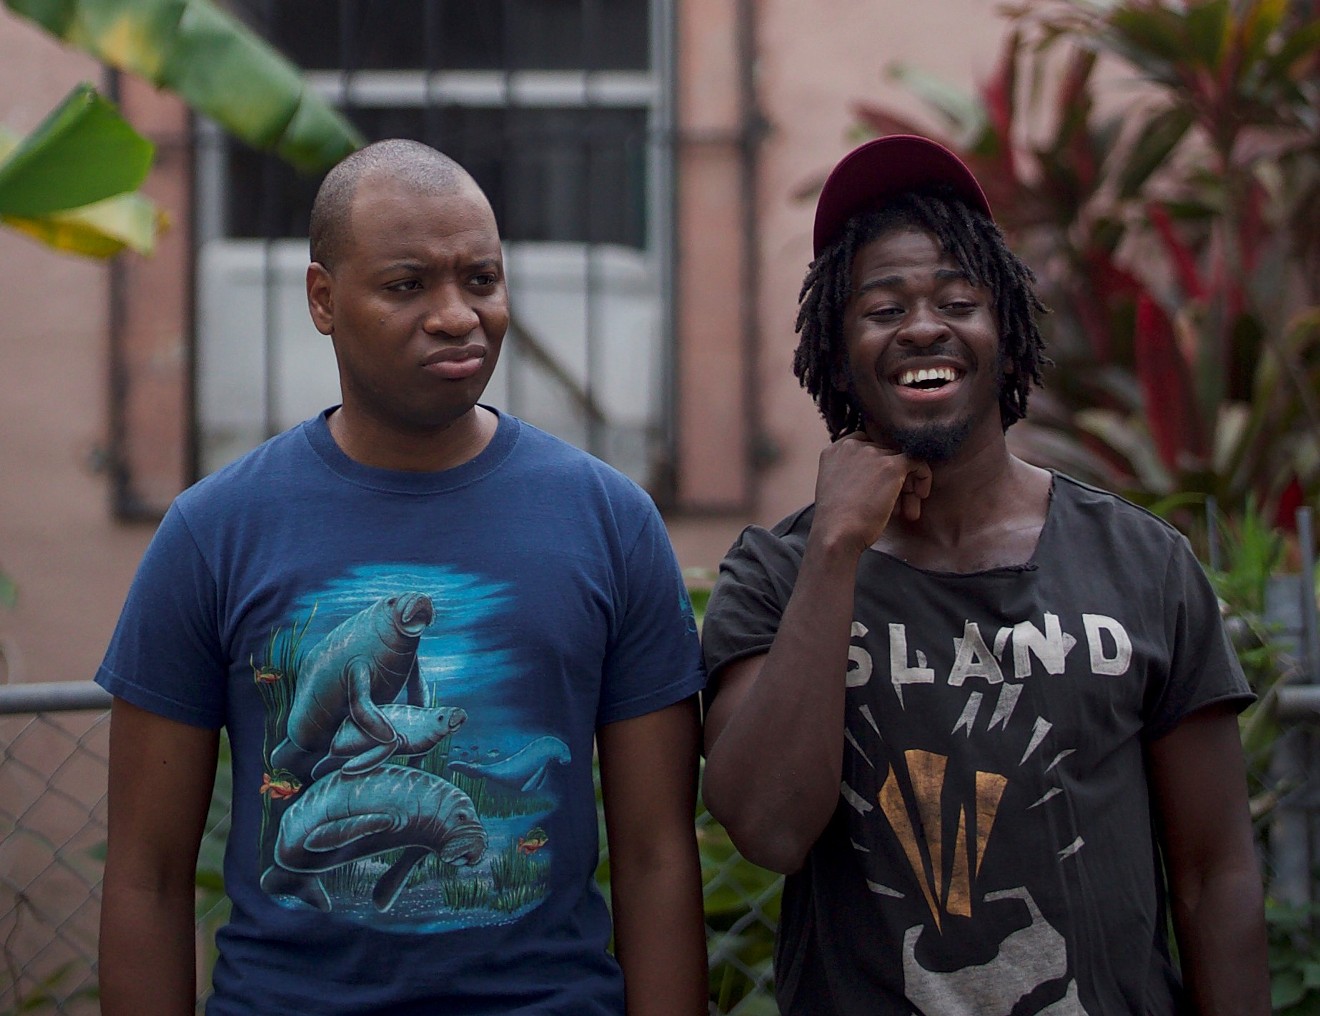 Joshua Jean-Baptiste (left) and Edson Jean in the Complex web series Grown.